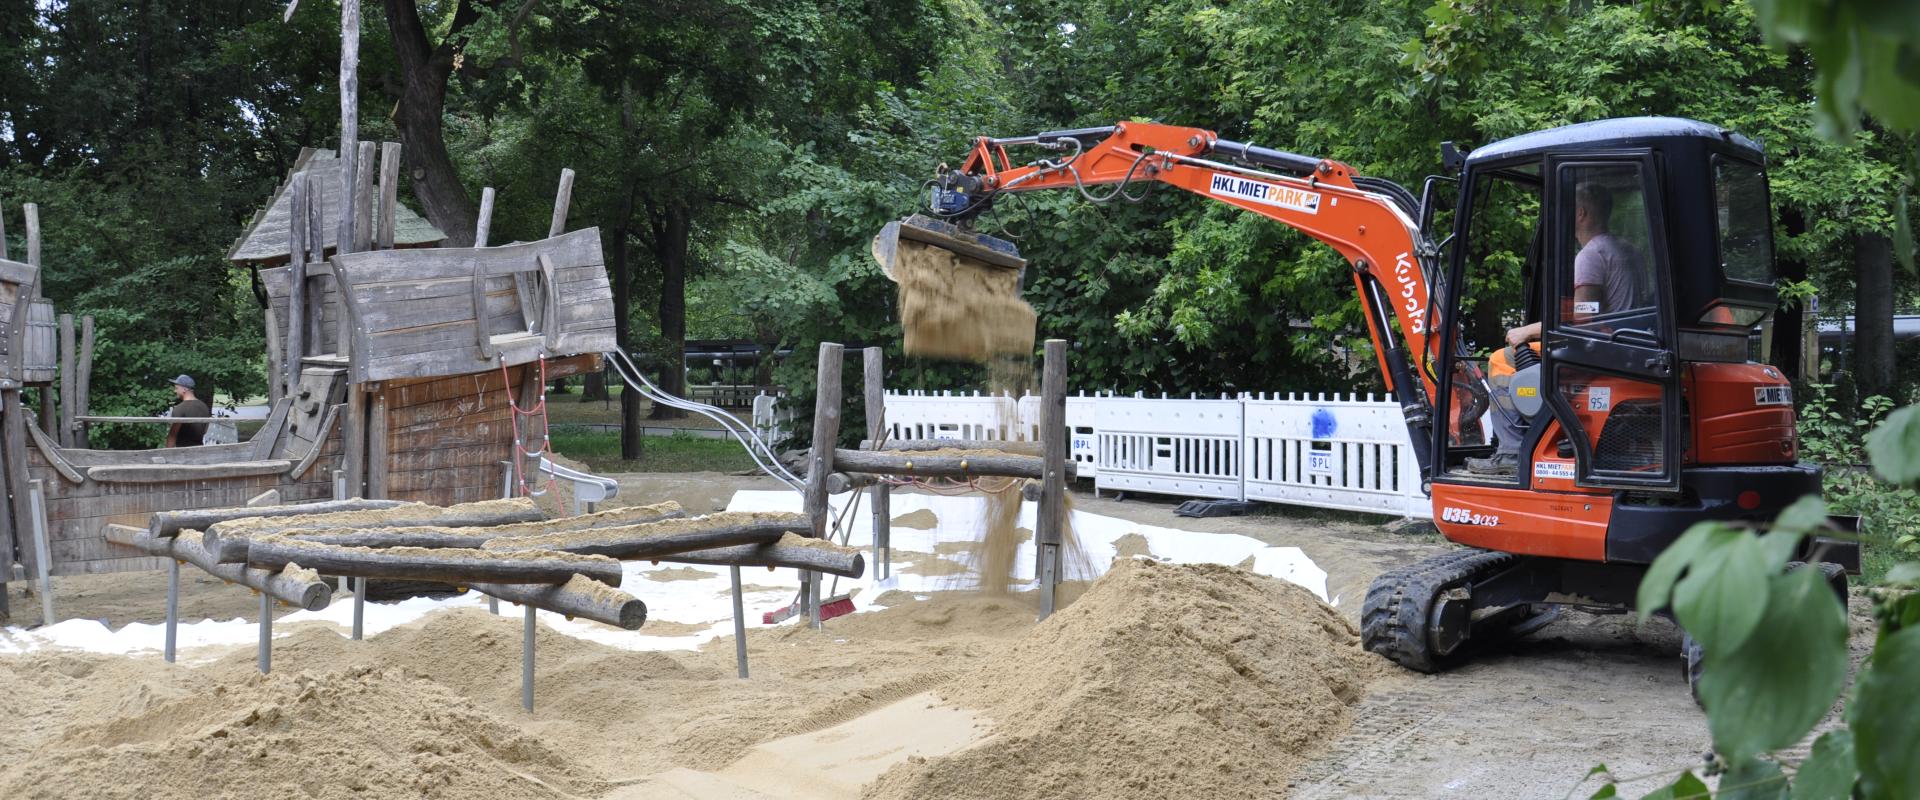 Playgrounds - New sand for the Paradies playground